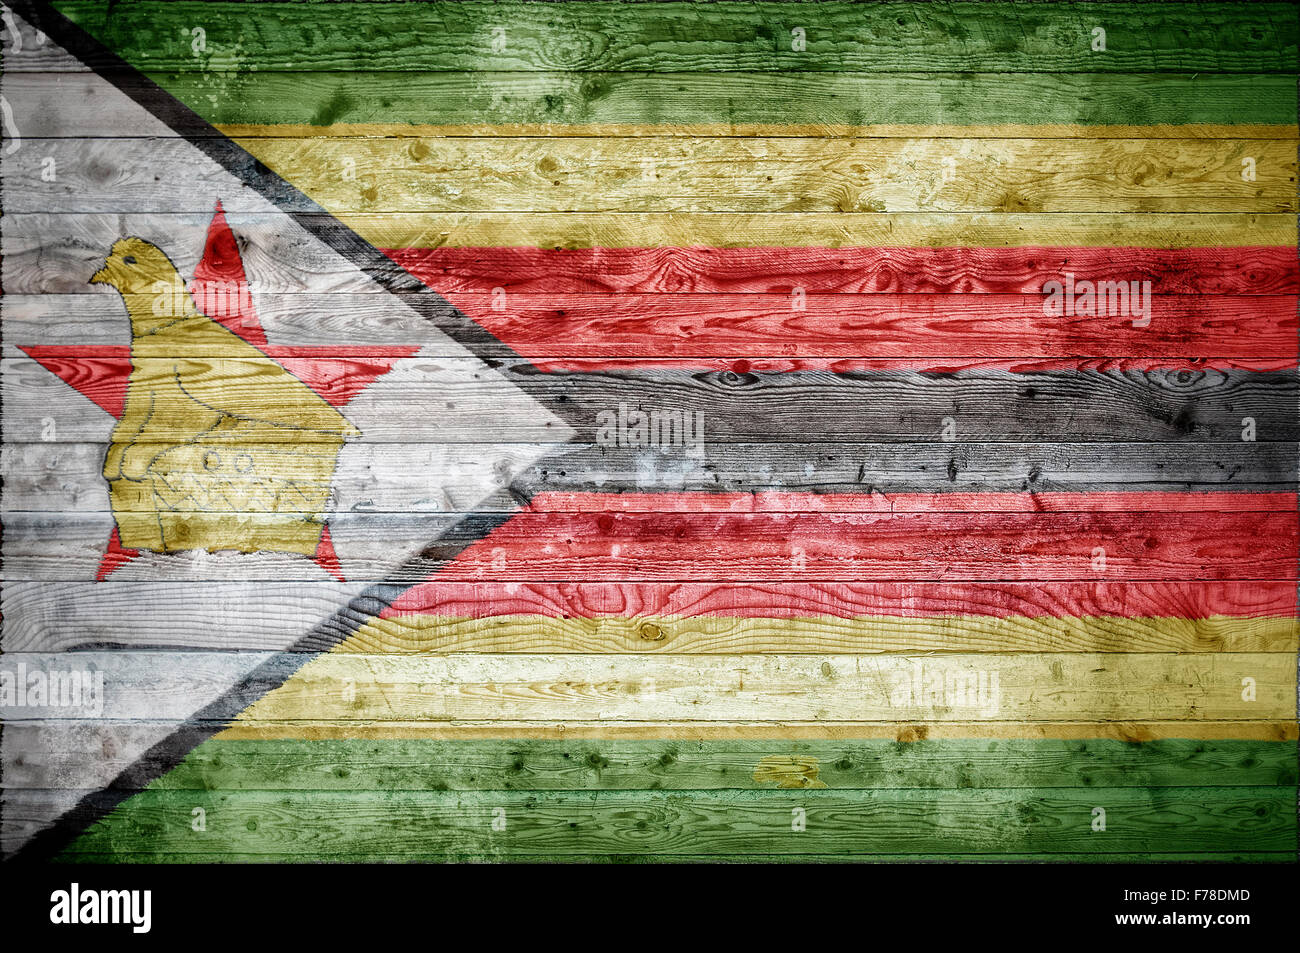 A vignetted background image of the flag of Zimbabwe onto wooden boards of a wall or floor. Stock Photo